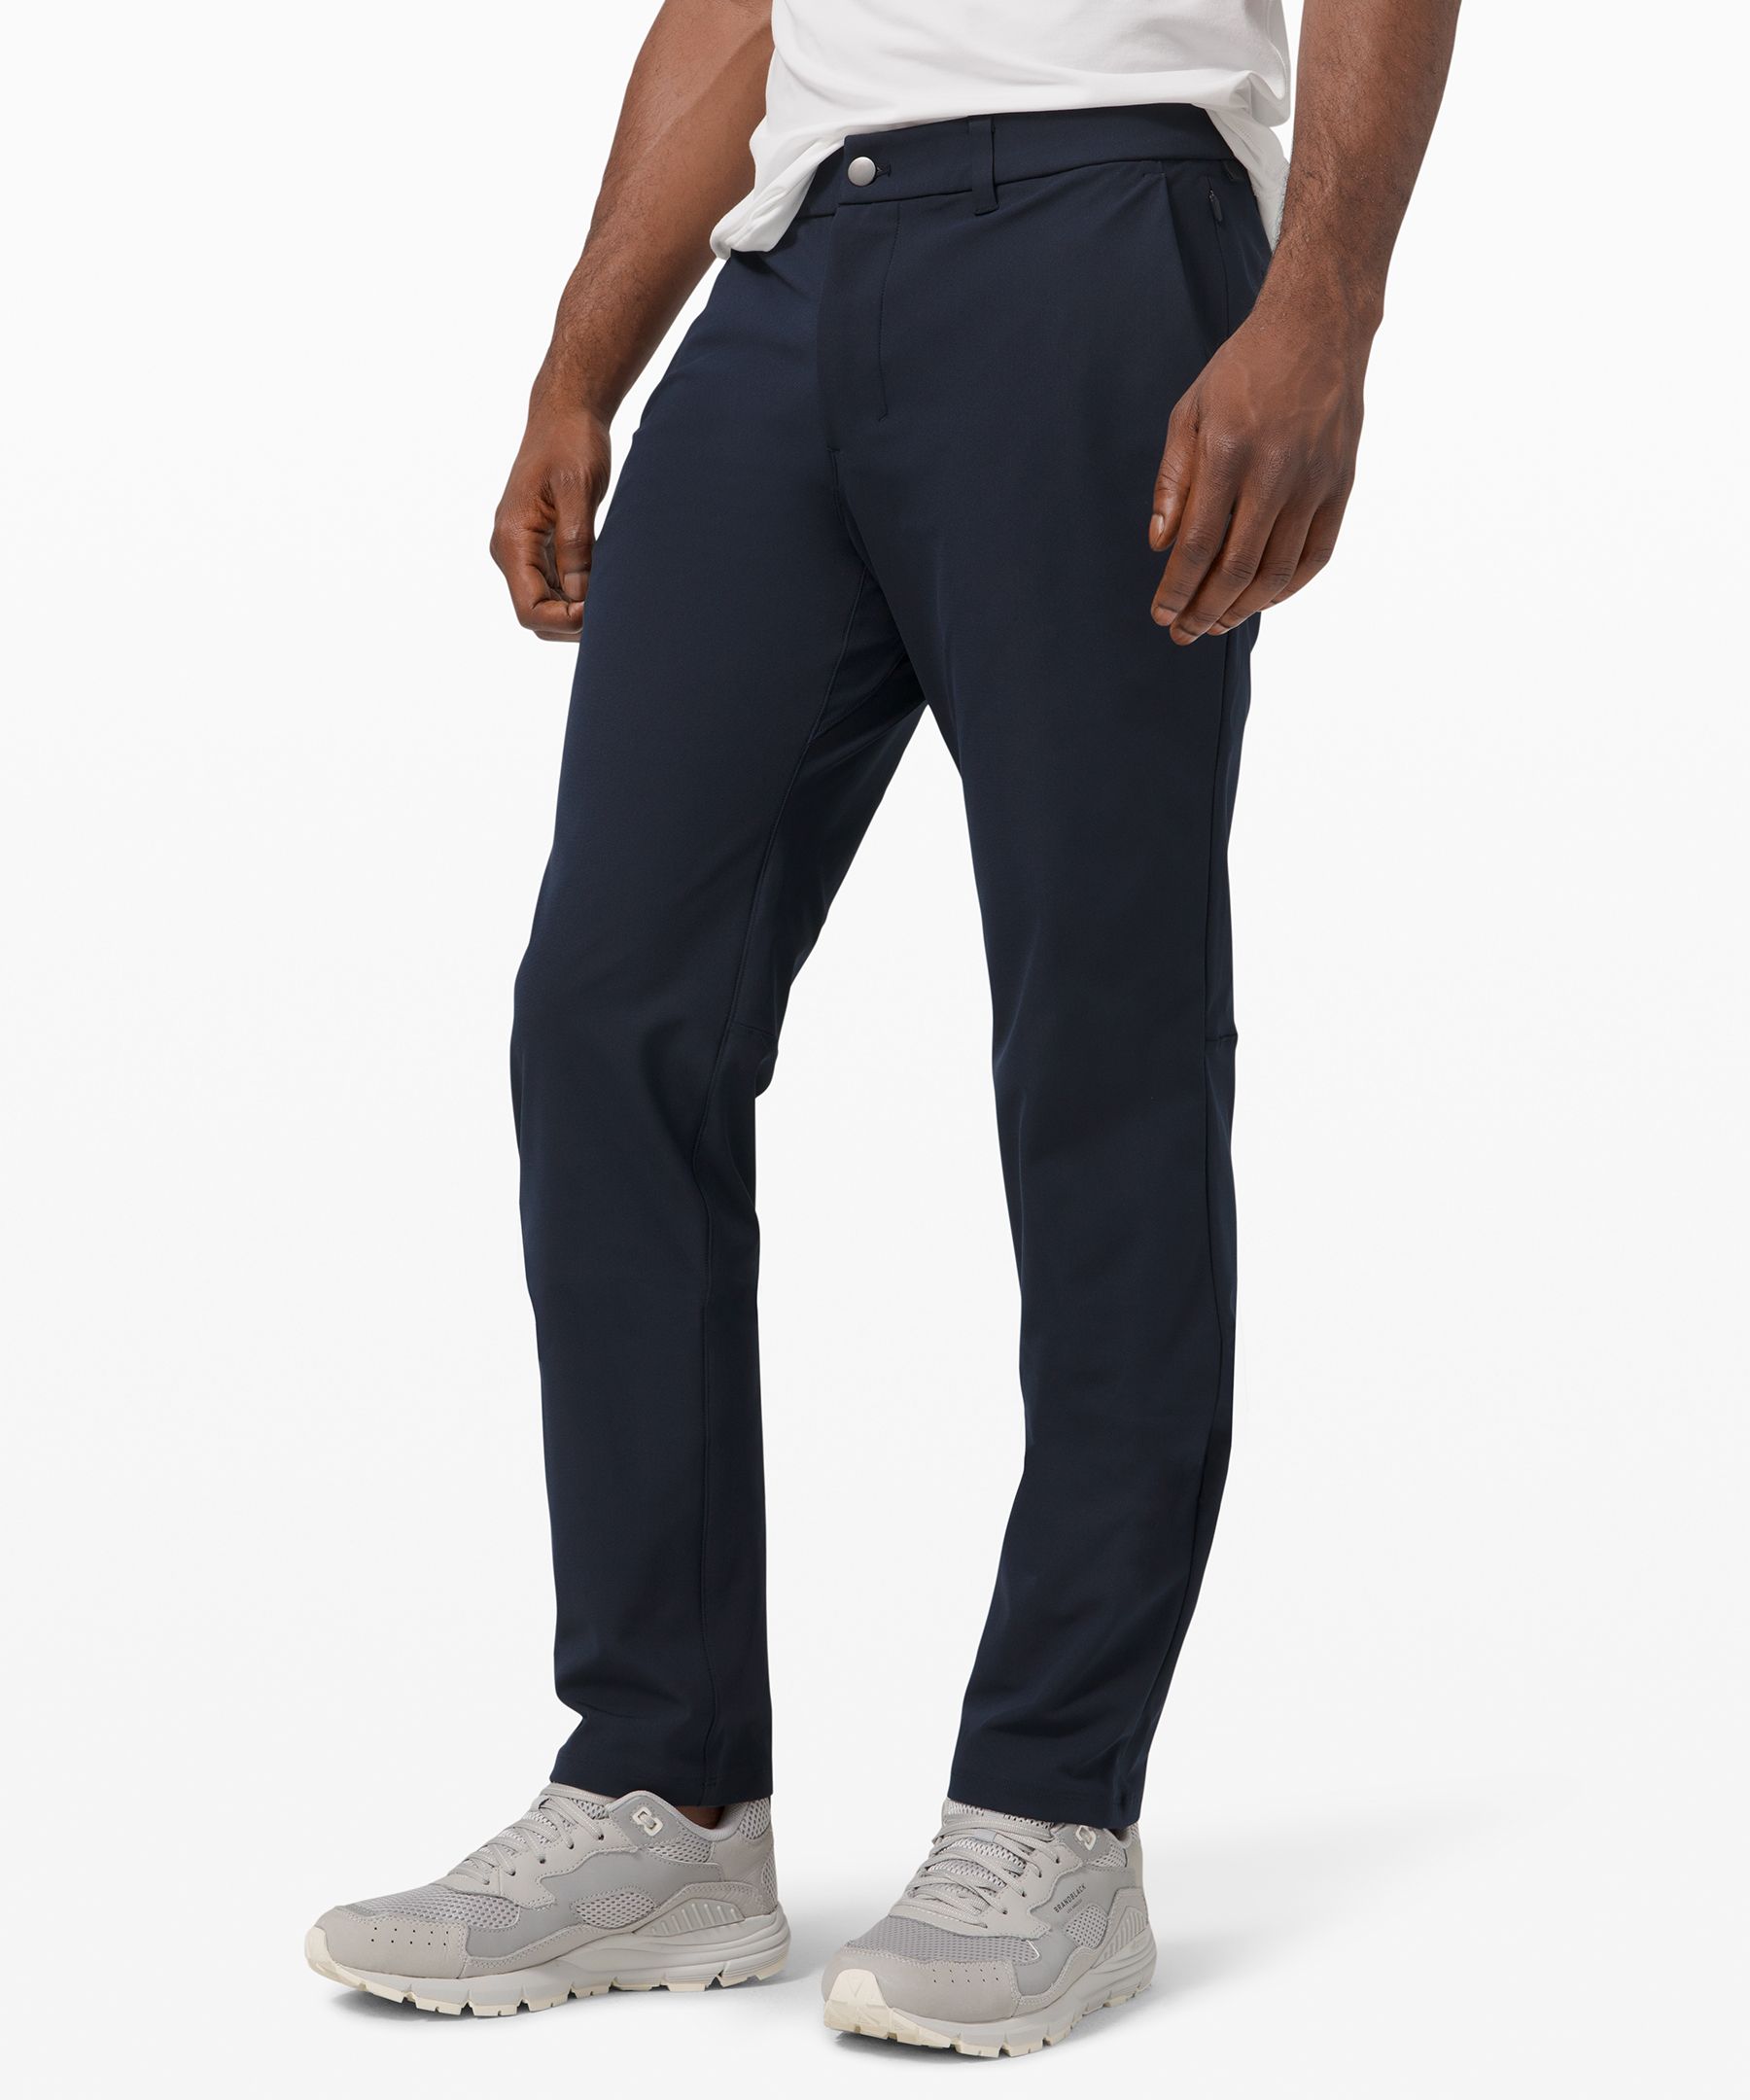 Lululemon Commission Relaxed-fit Pants 34